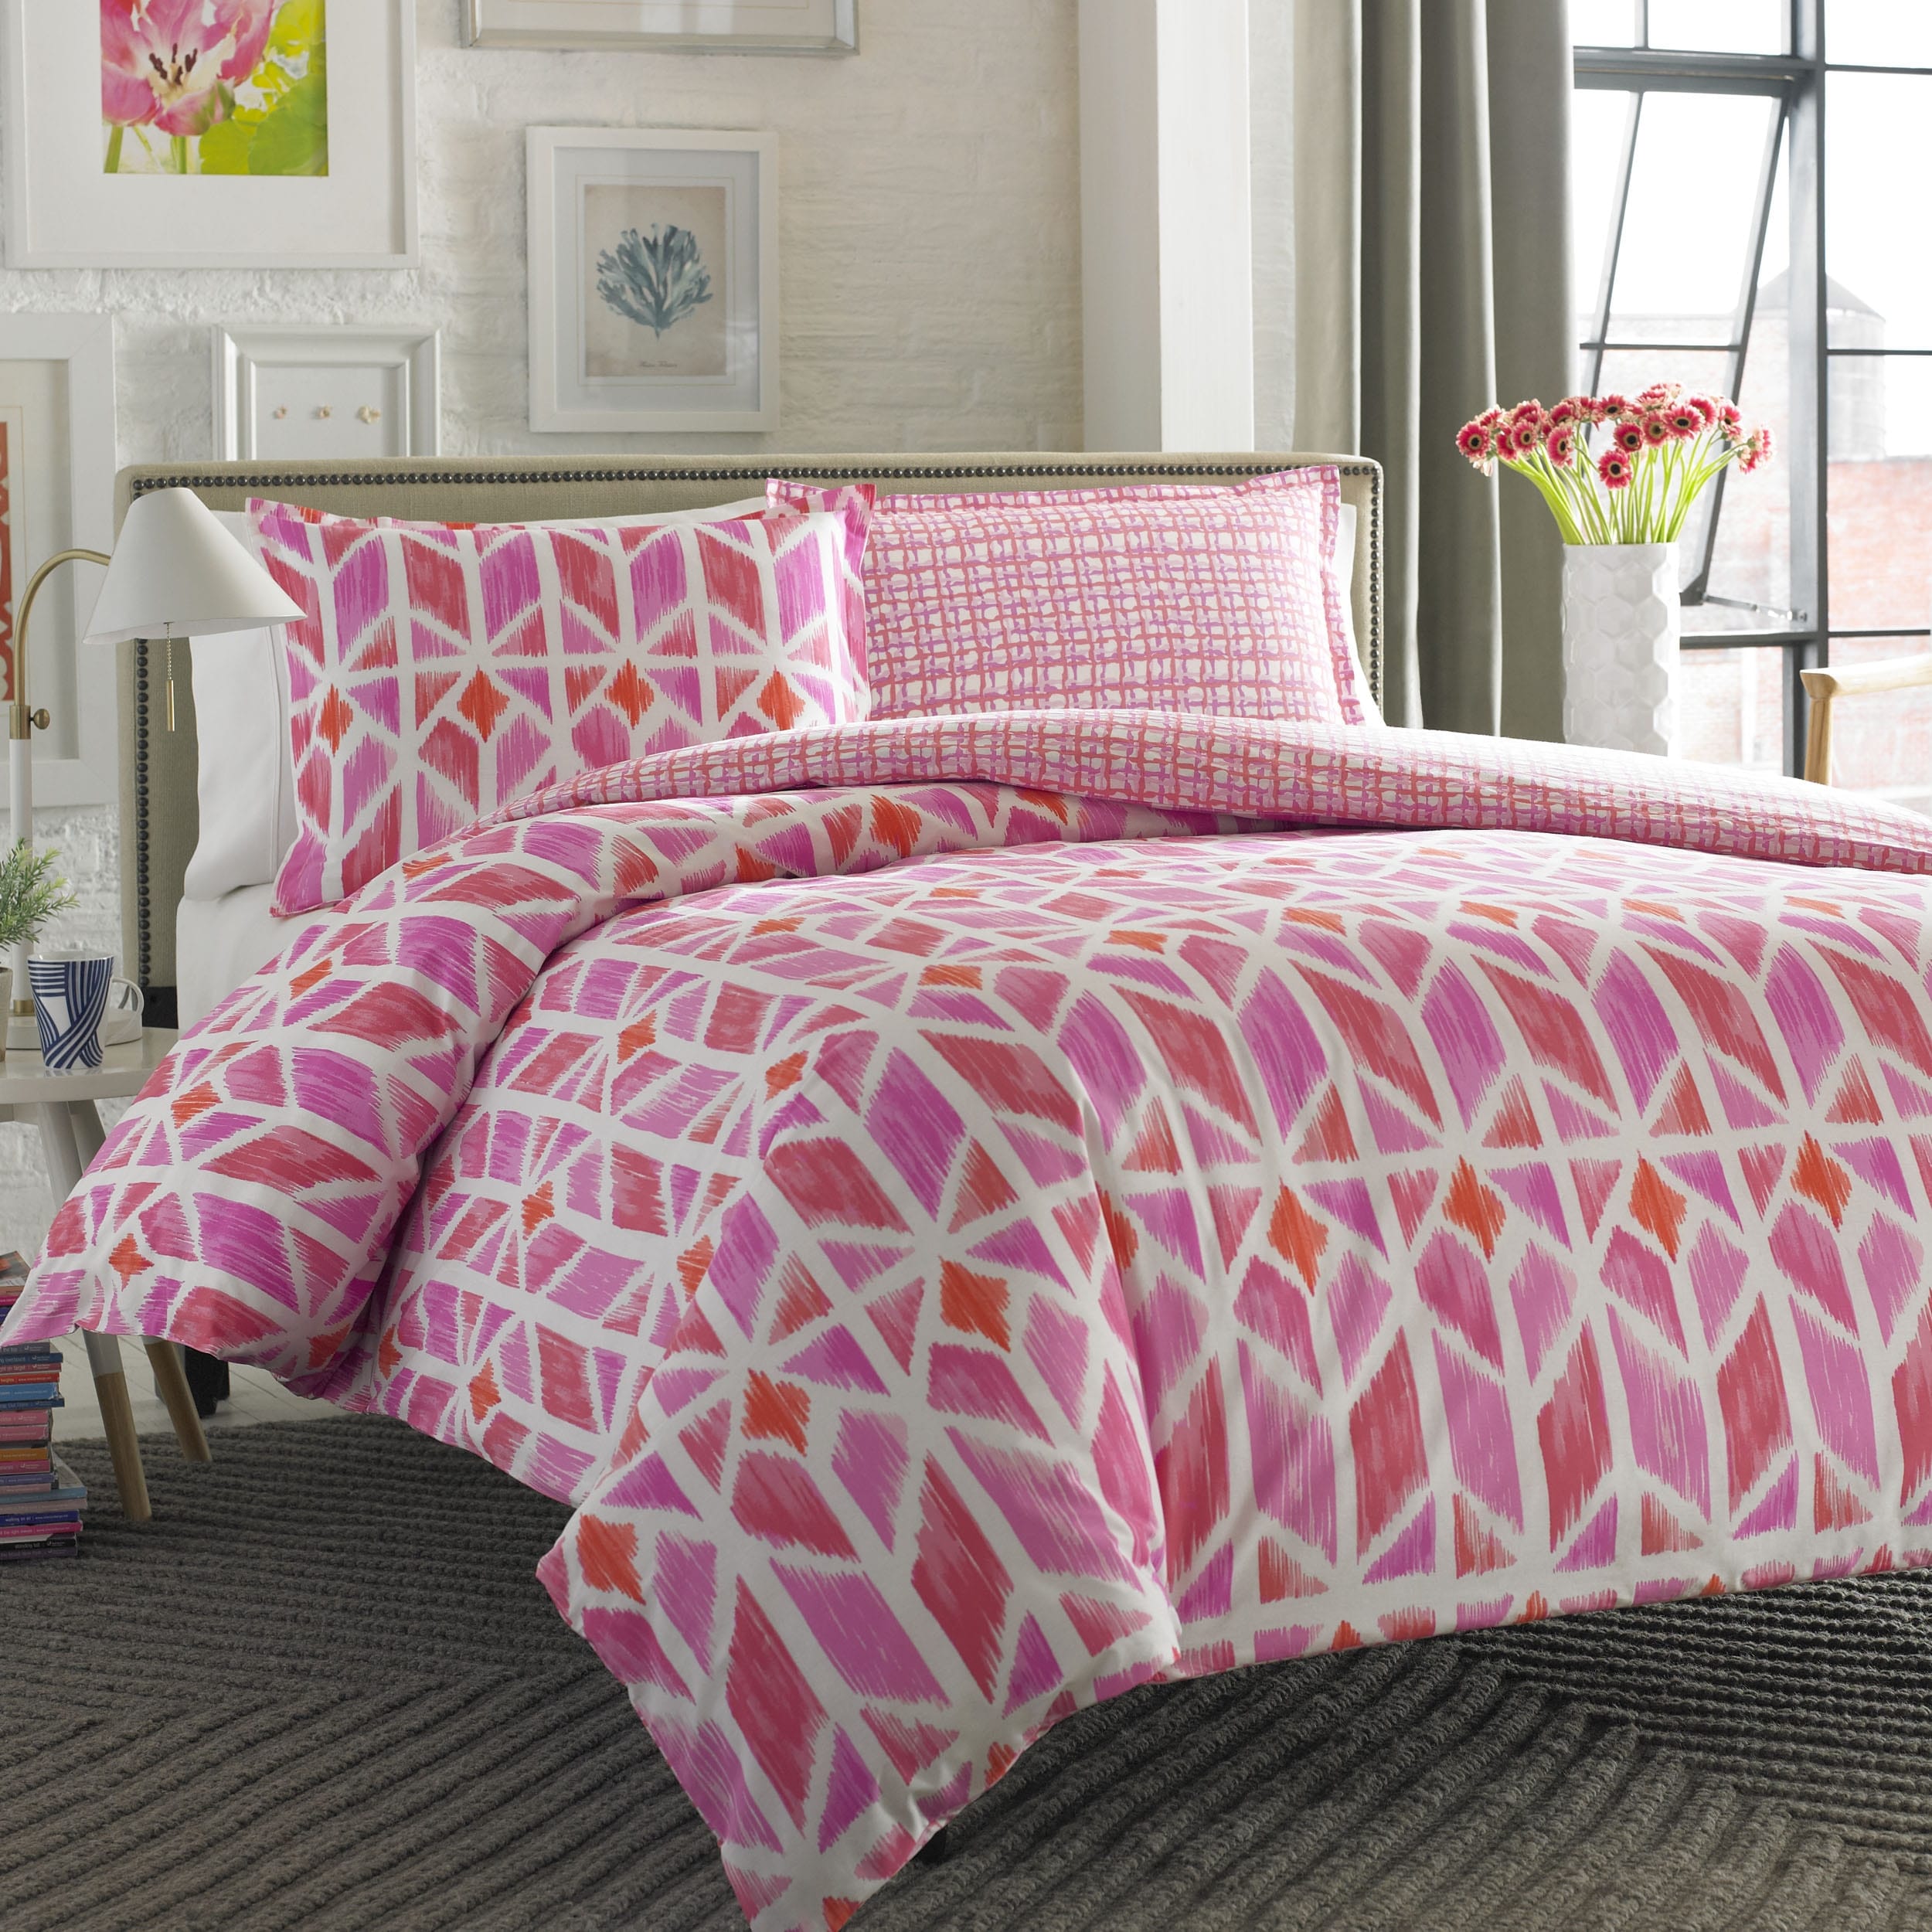 Pink Bedding – Best Selection of Pink Colored Bedding & Sets ...